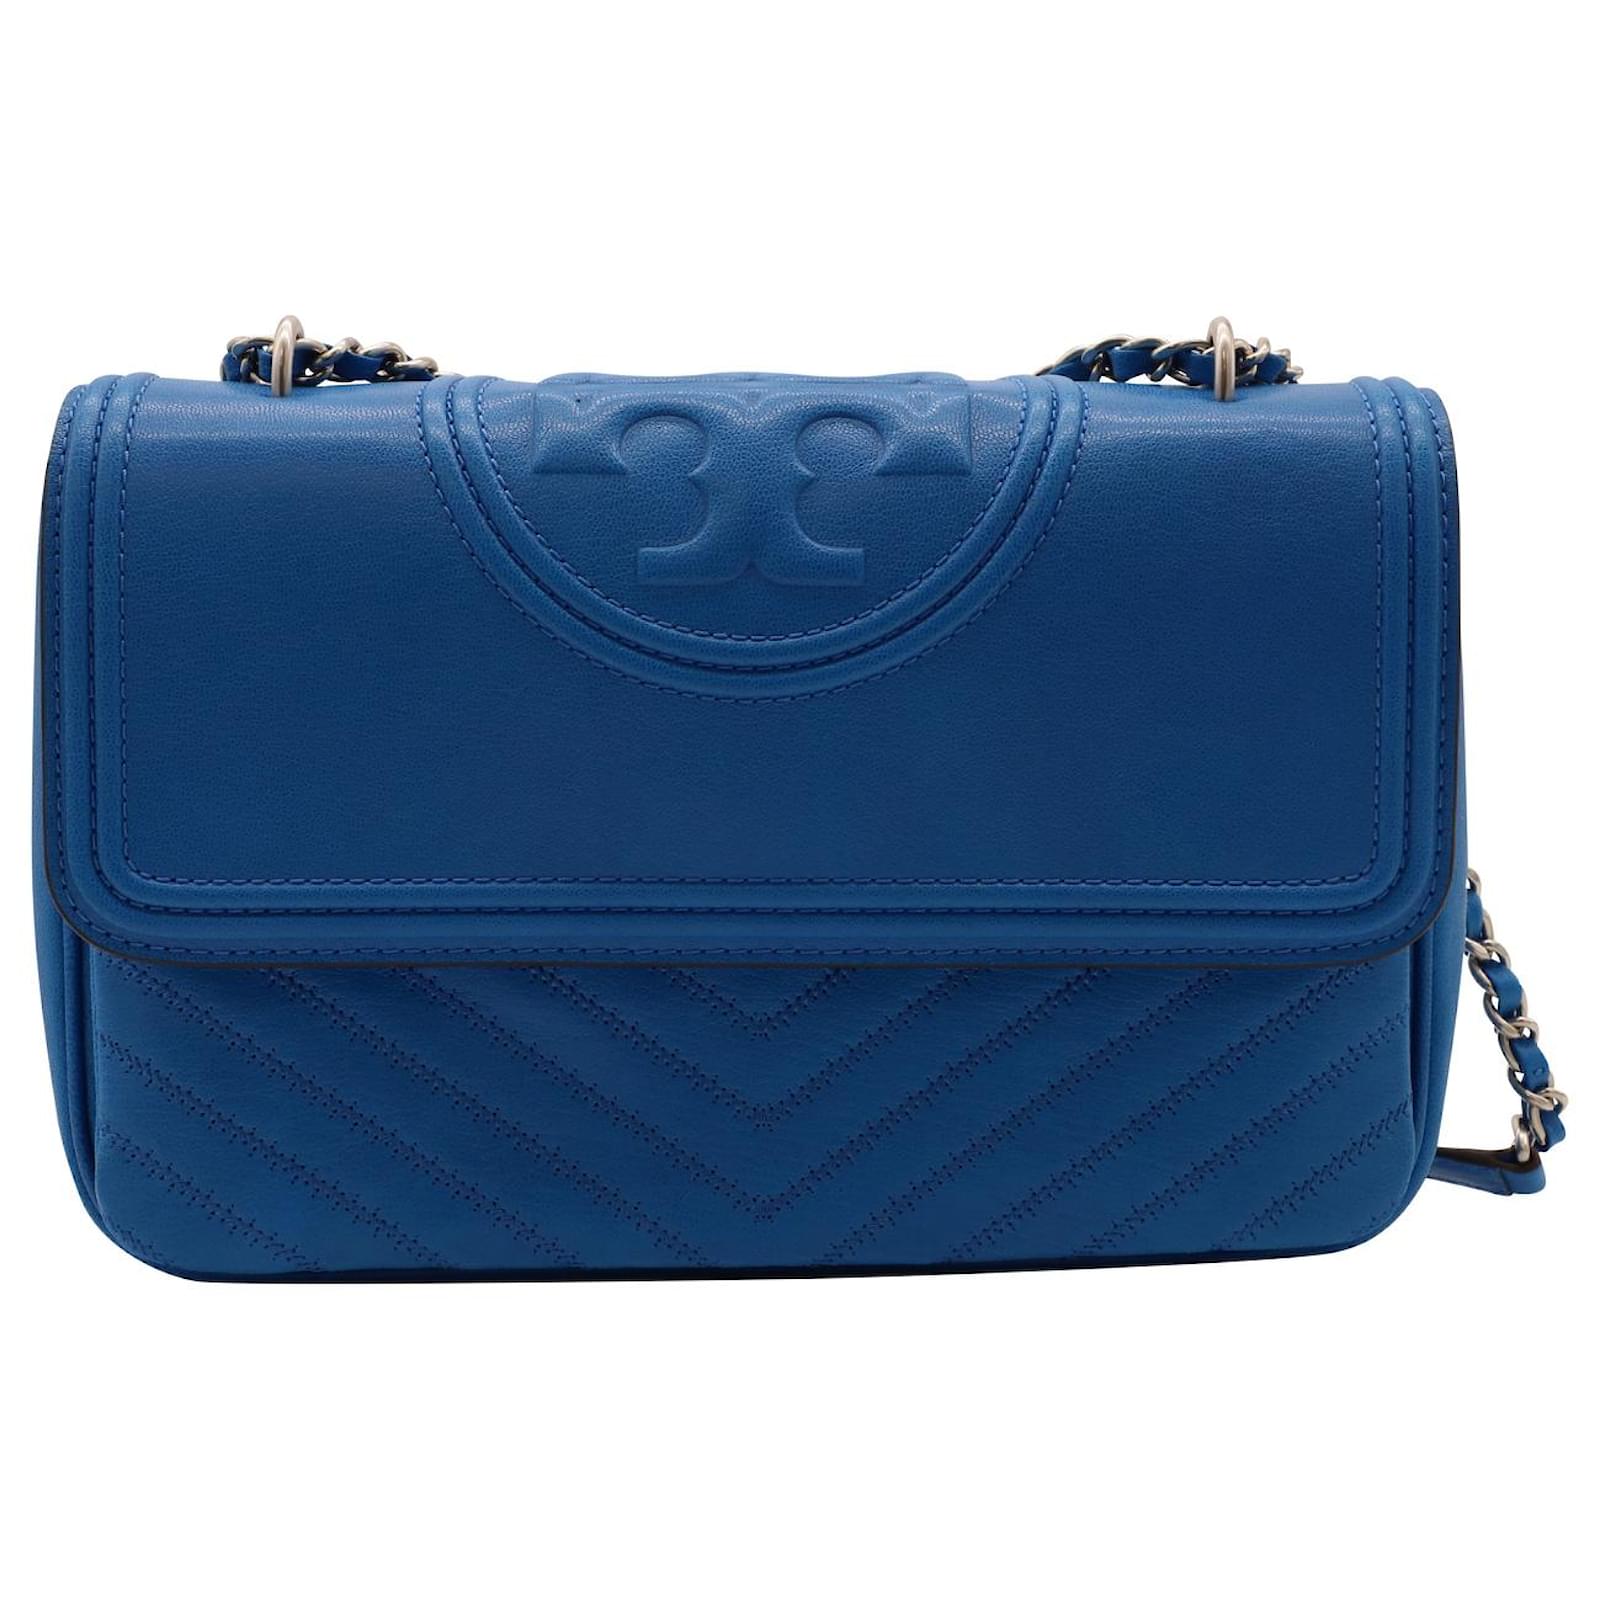 Tory Burch Fleming Convertible Shoulder Bag in Blue Leather ref